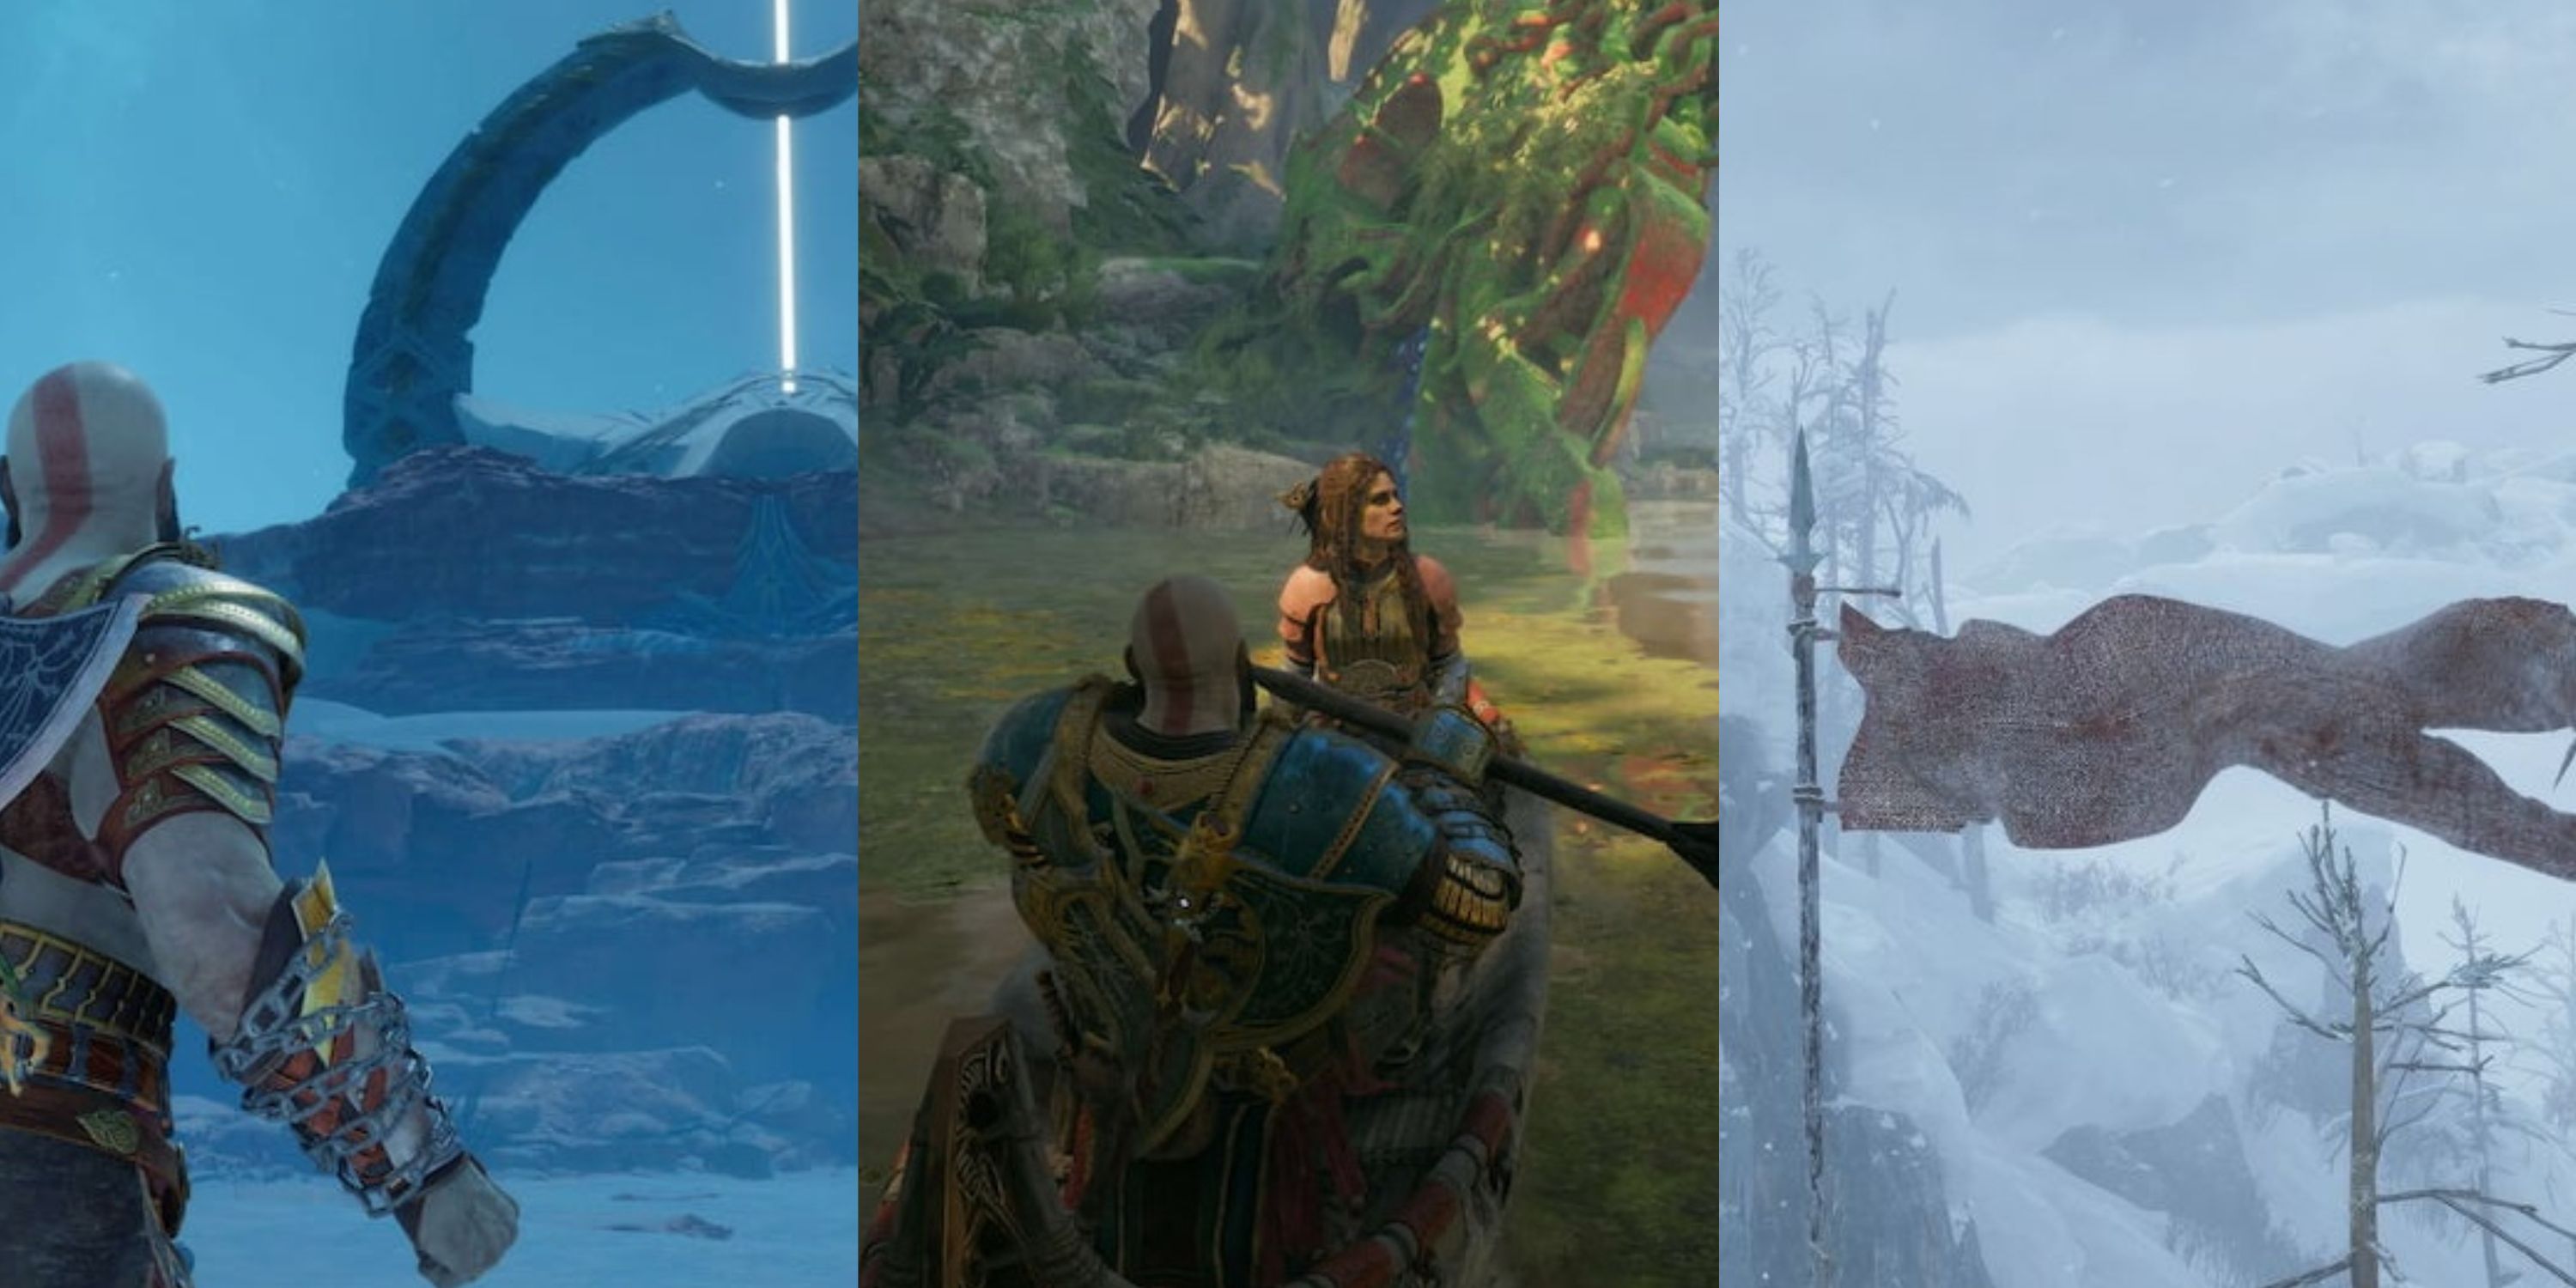 GOD OF WAR: The Jötunheim Wall of Prophecy